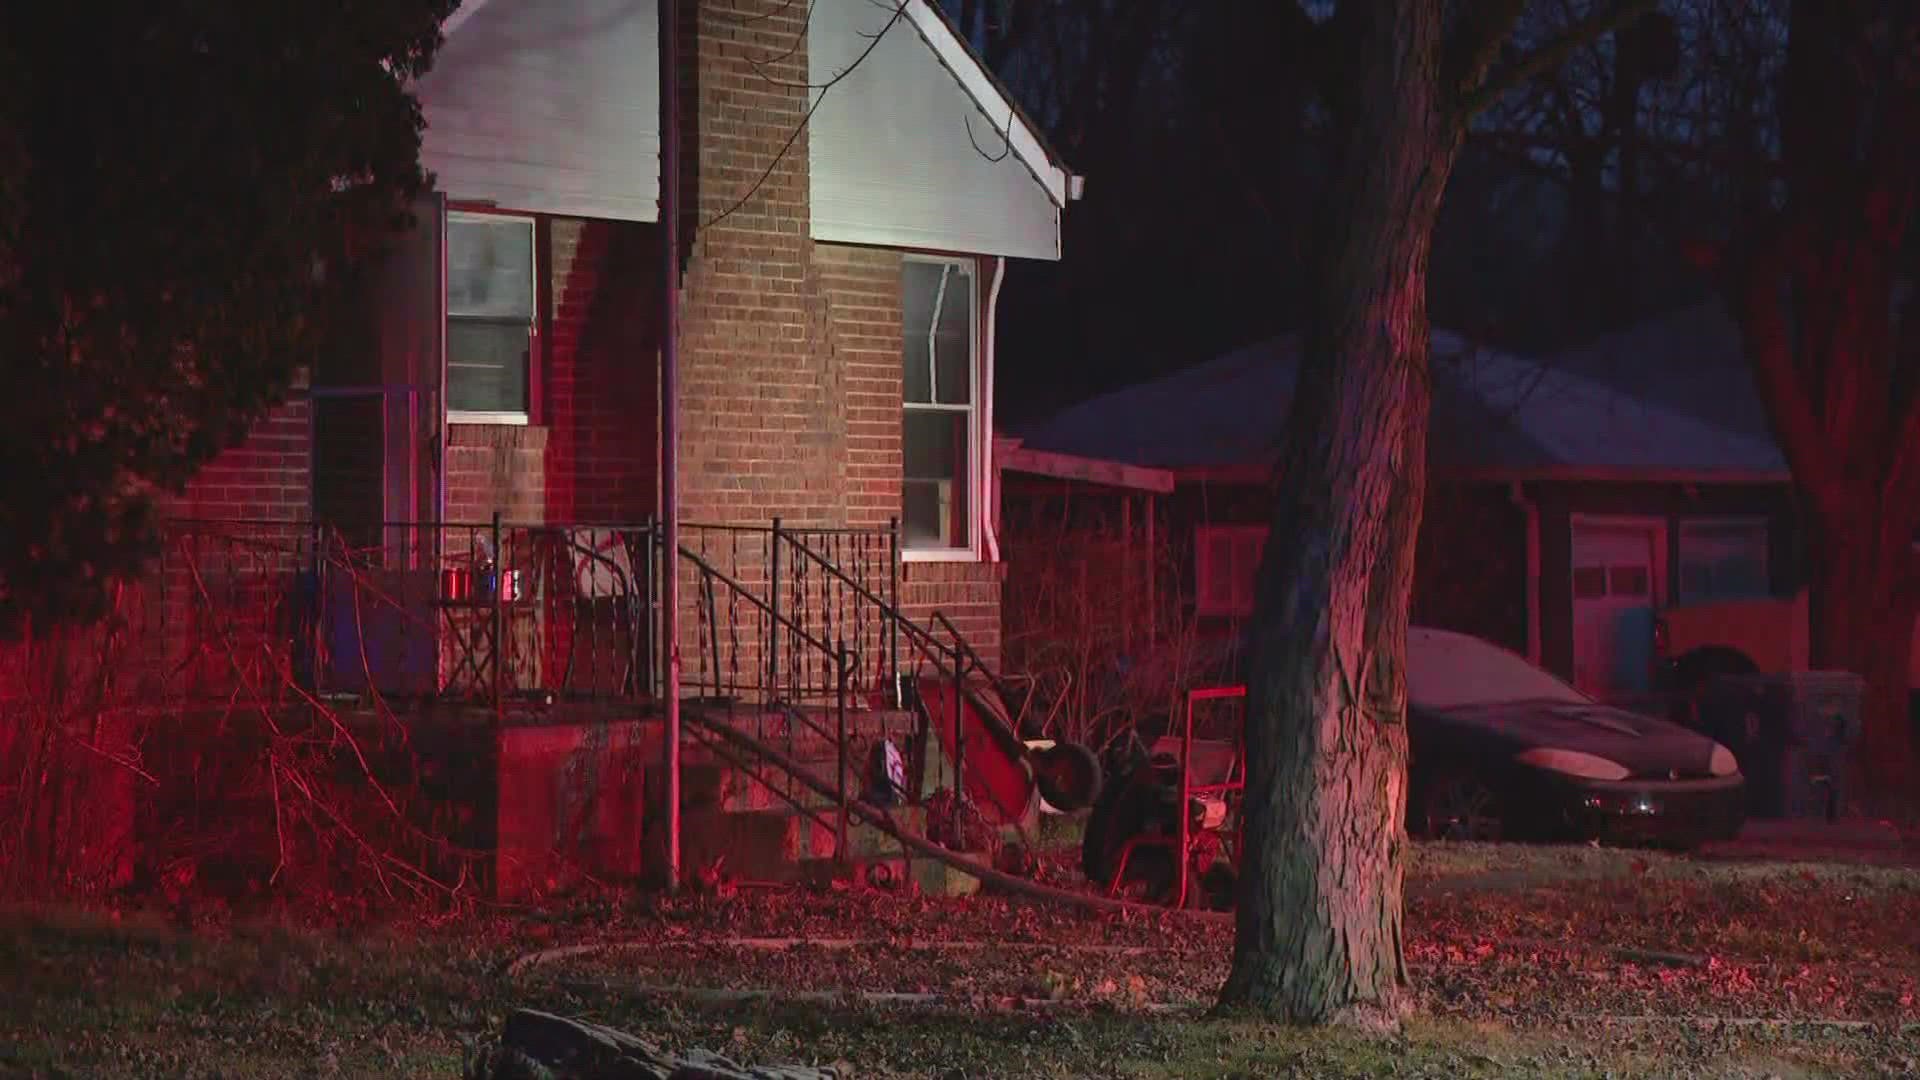 Fire crews were called to the fire on Post Road shortly before 7 a.m. and pulled the man from the house.